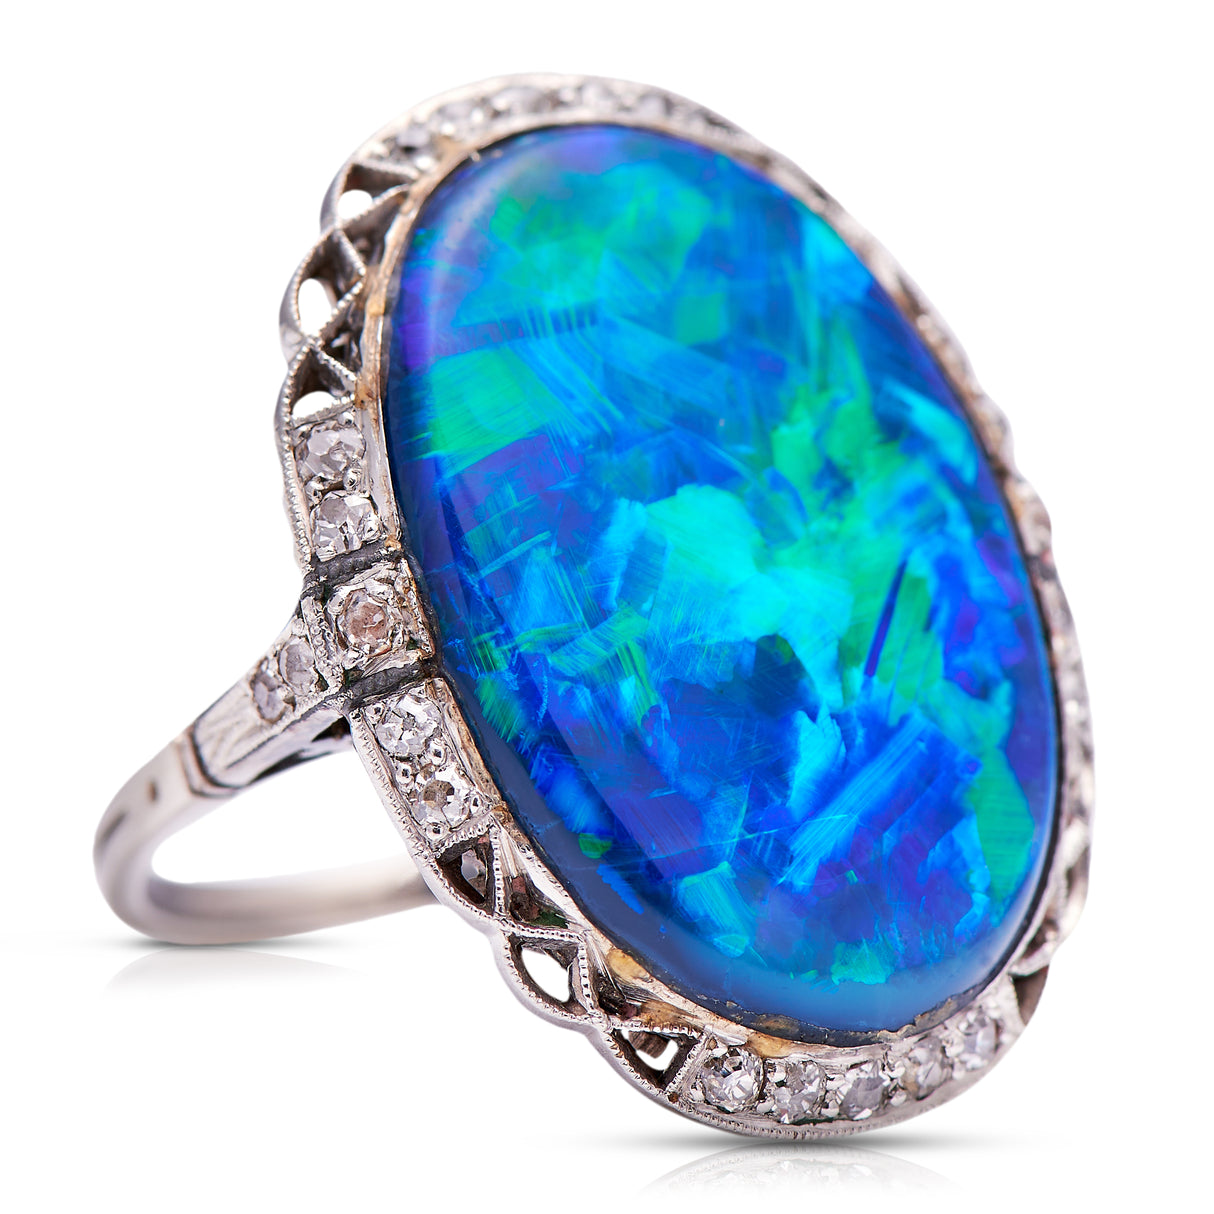 Exceptional | Edwardian, Black Opal and Diamond Ring